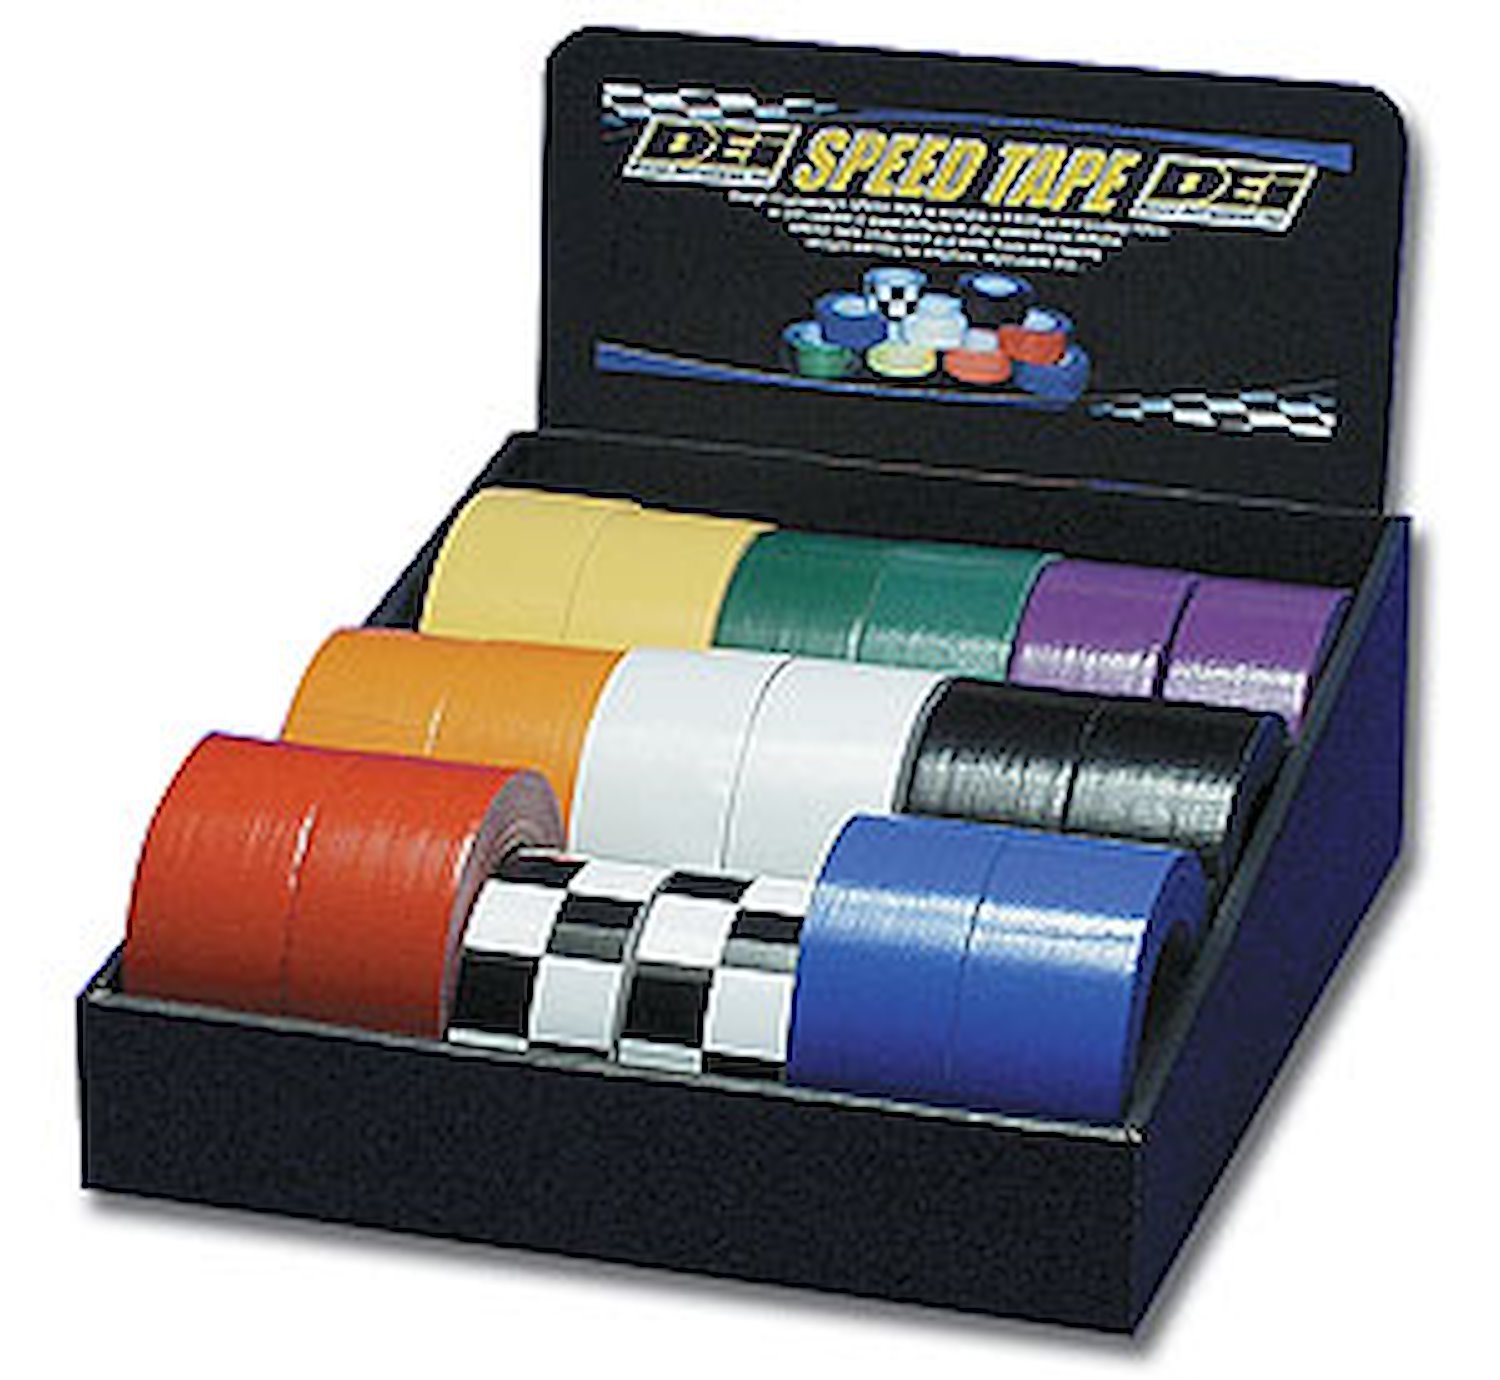 Speed Tape Assortment Includes full-color display box & 2 rolls of each color